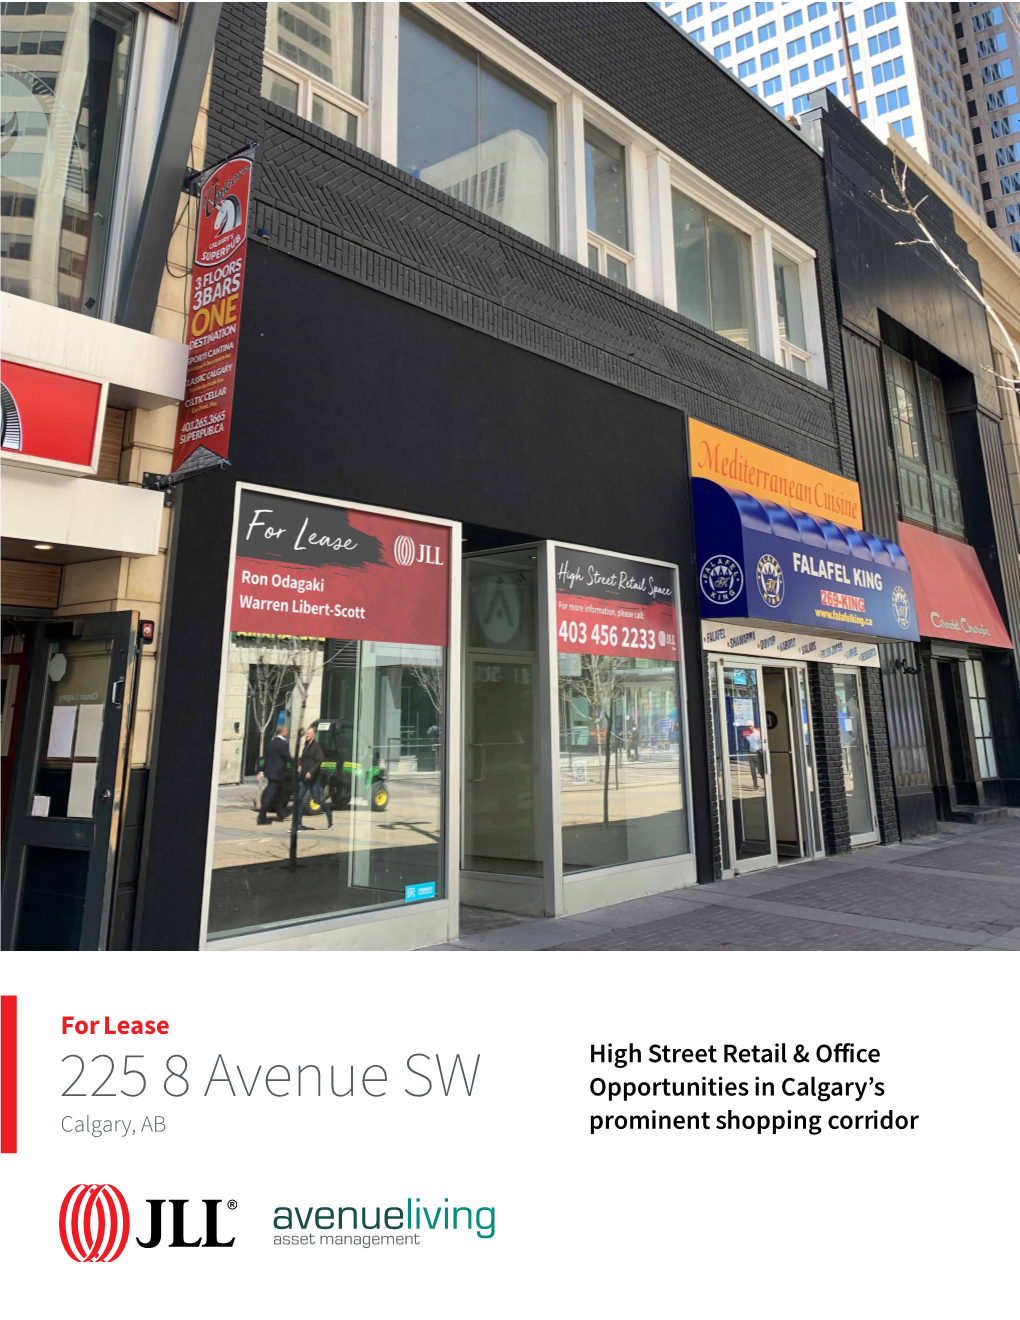 225 8 Avenue SW Opportunities in Calgary’S Calgary, AB Prominent Shopping Corridor for Lease Site Plans 225 8 Avenue SW